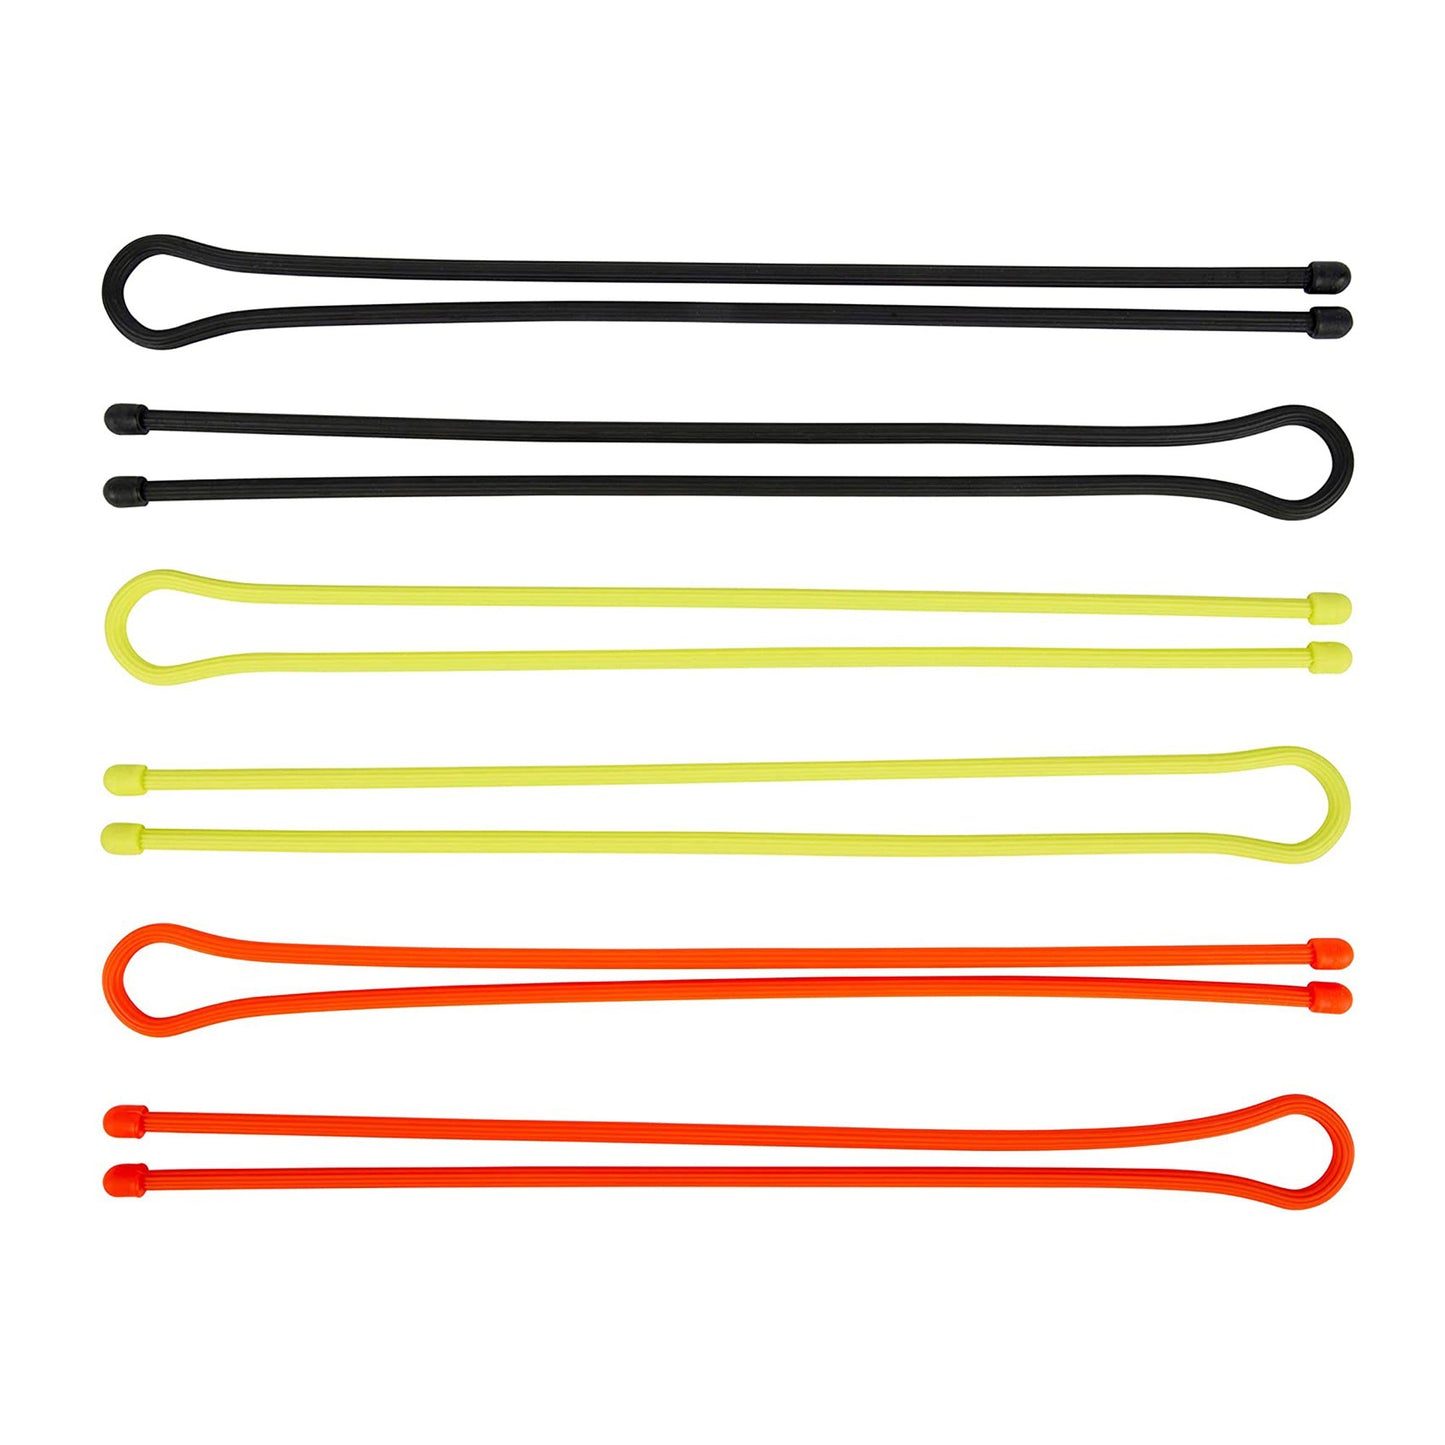 Nite Ize Gear Tie ProPack 32 in. - 6 Pack - Assorted Colours - 15-08112